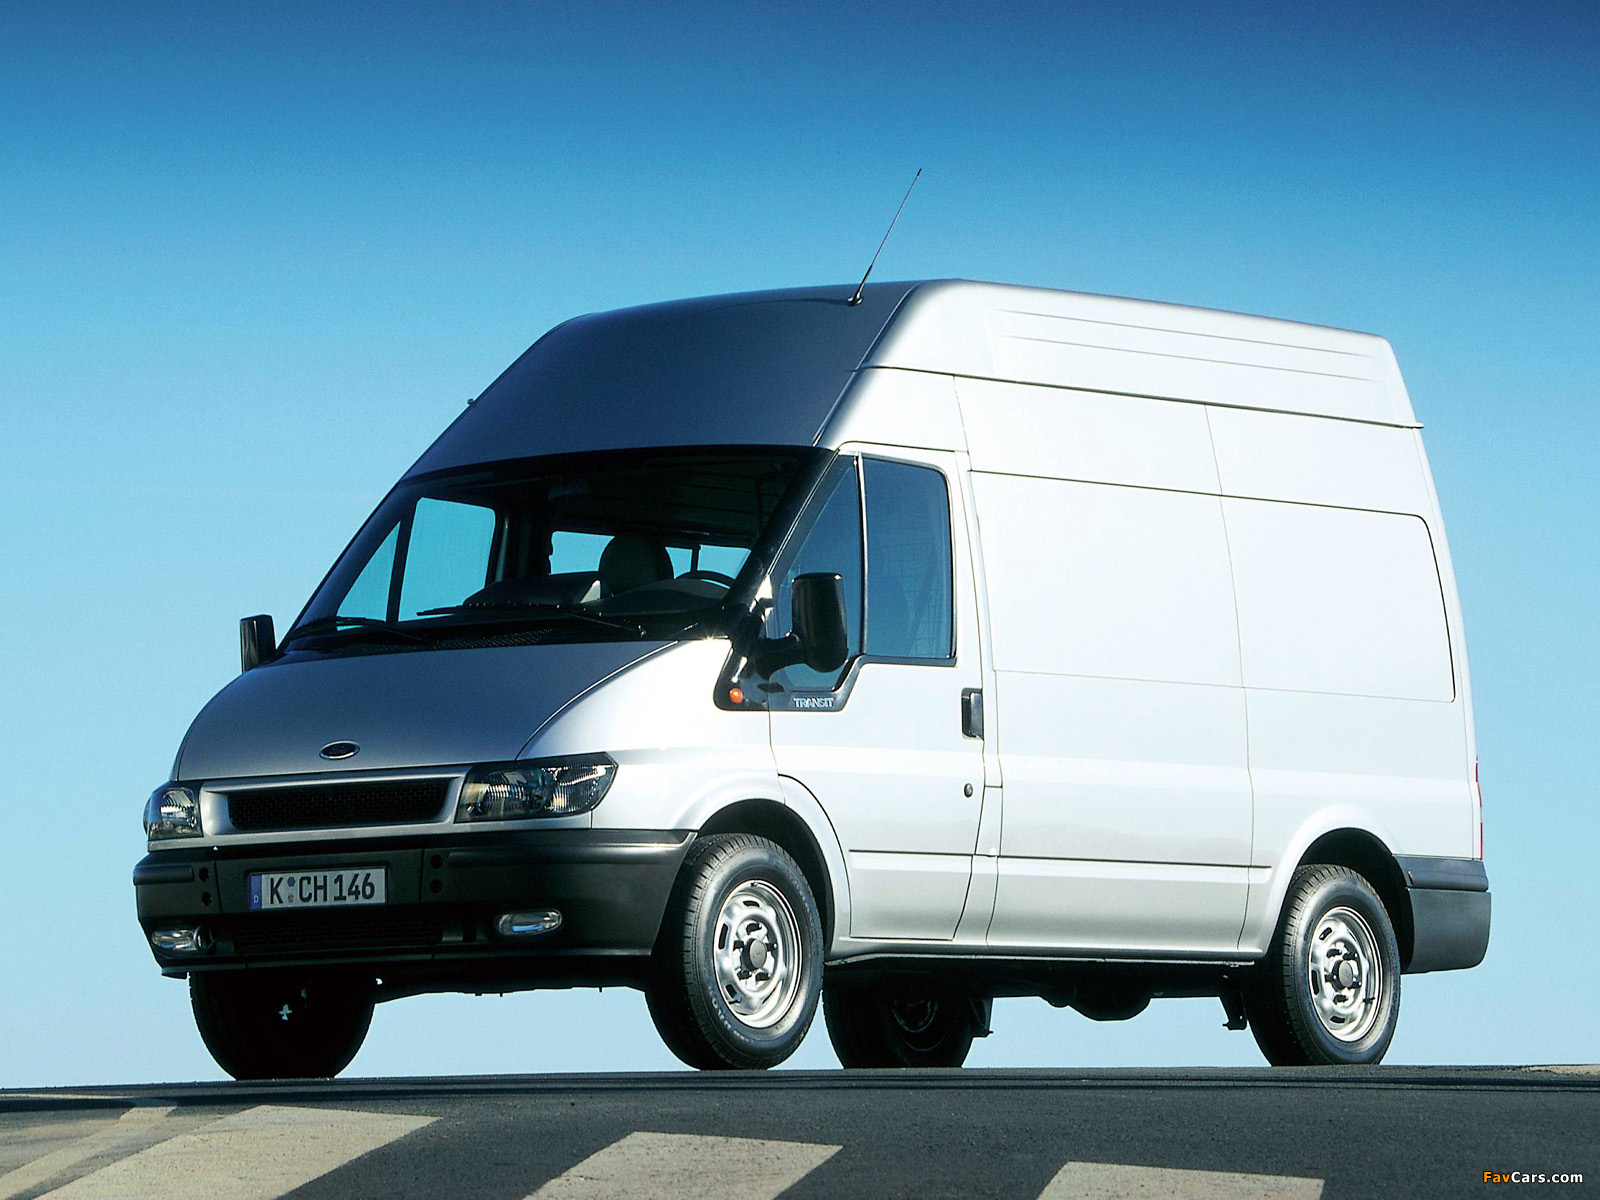 Форд транзит 2.0 2000 2006. Ford Transit 2000. Ford Transit 2000 грузовой. Ford van 2000. Ford Transit van '2000–06.